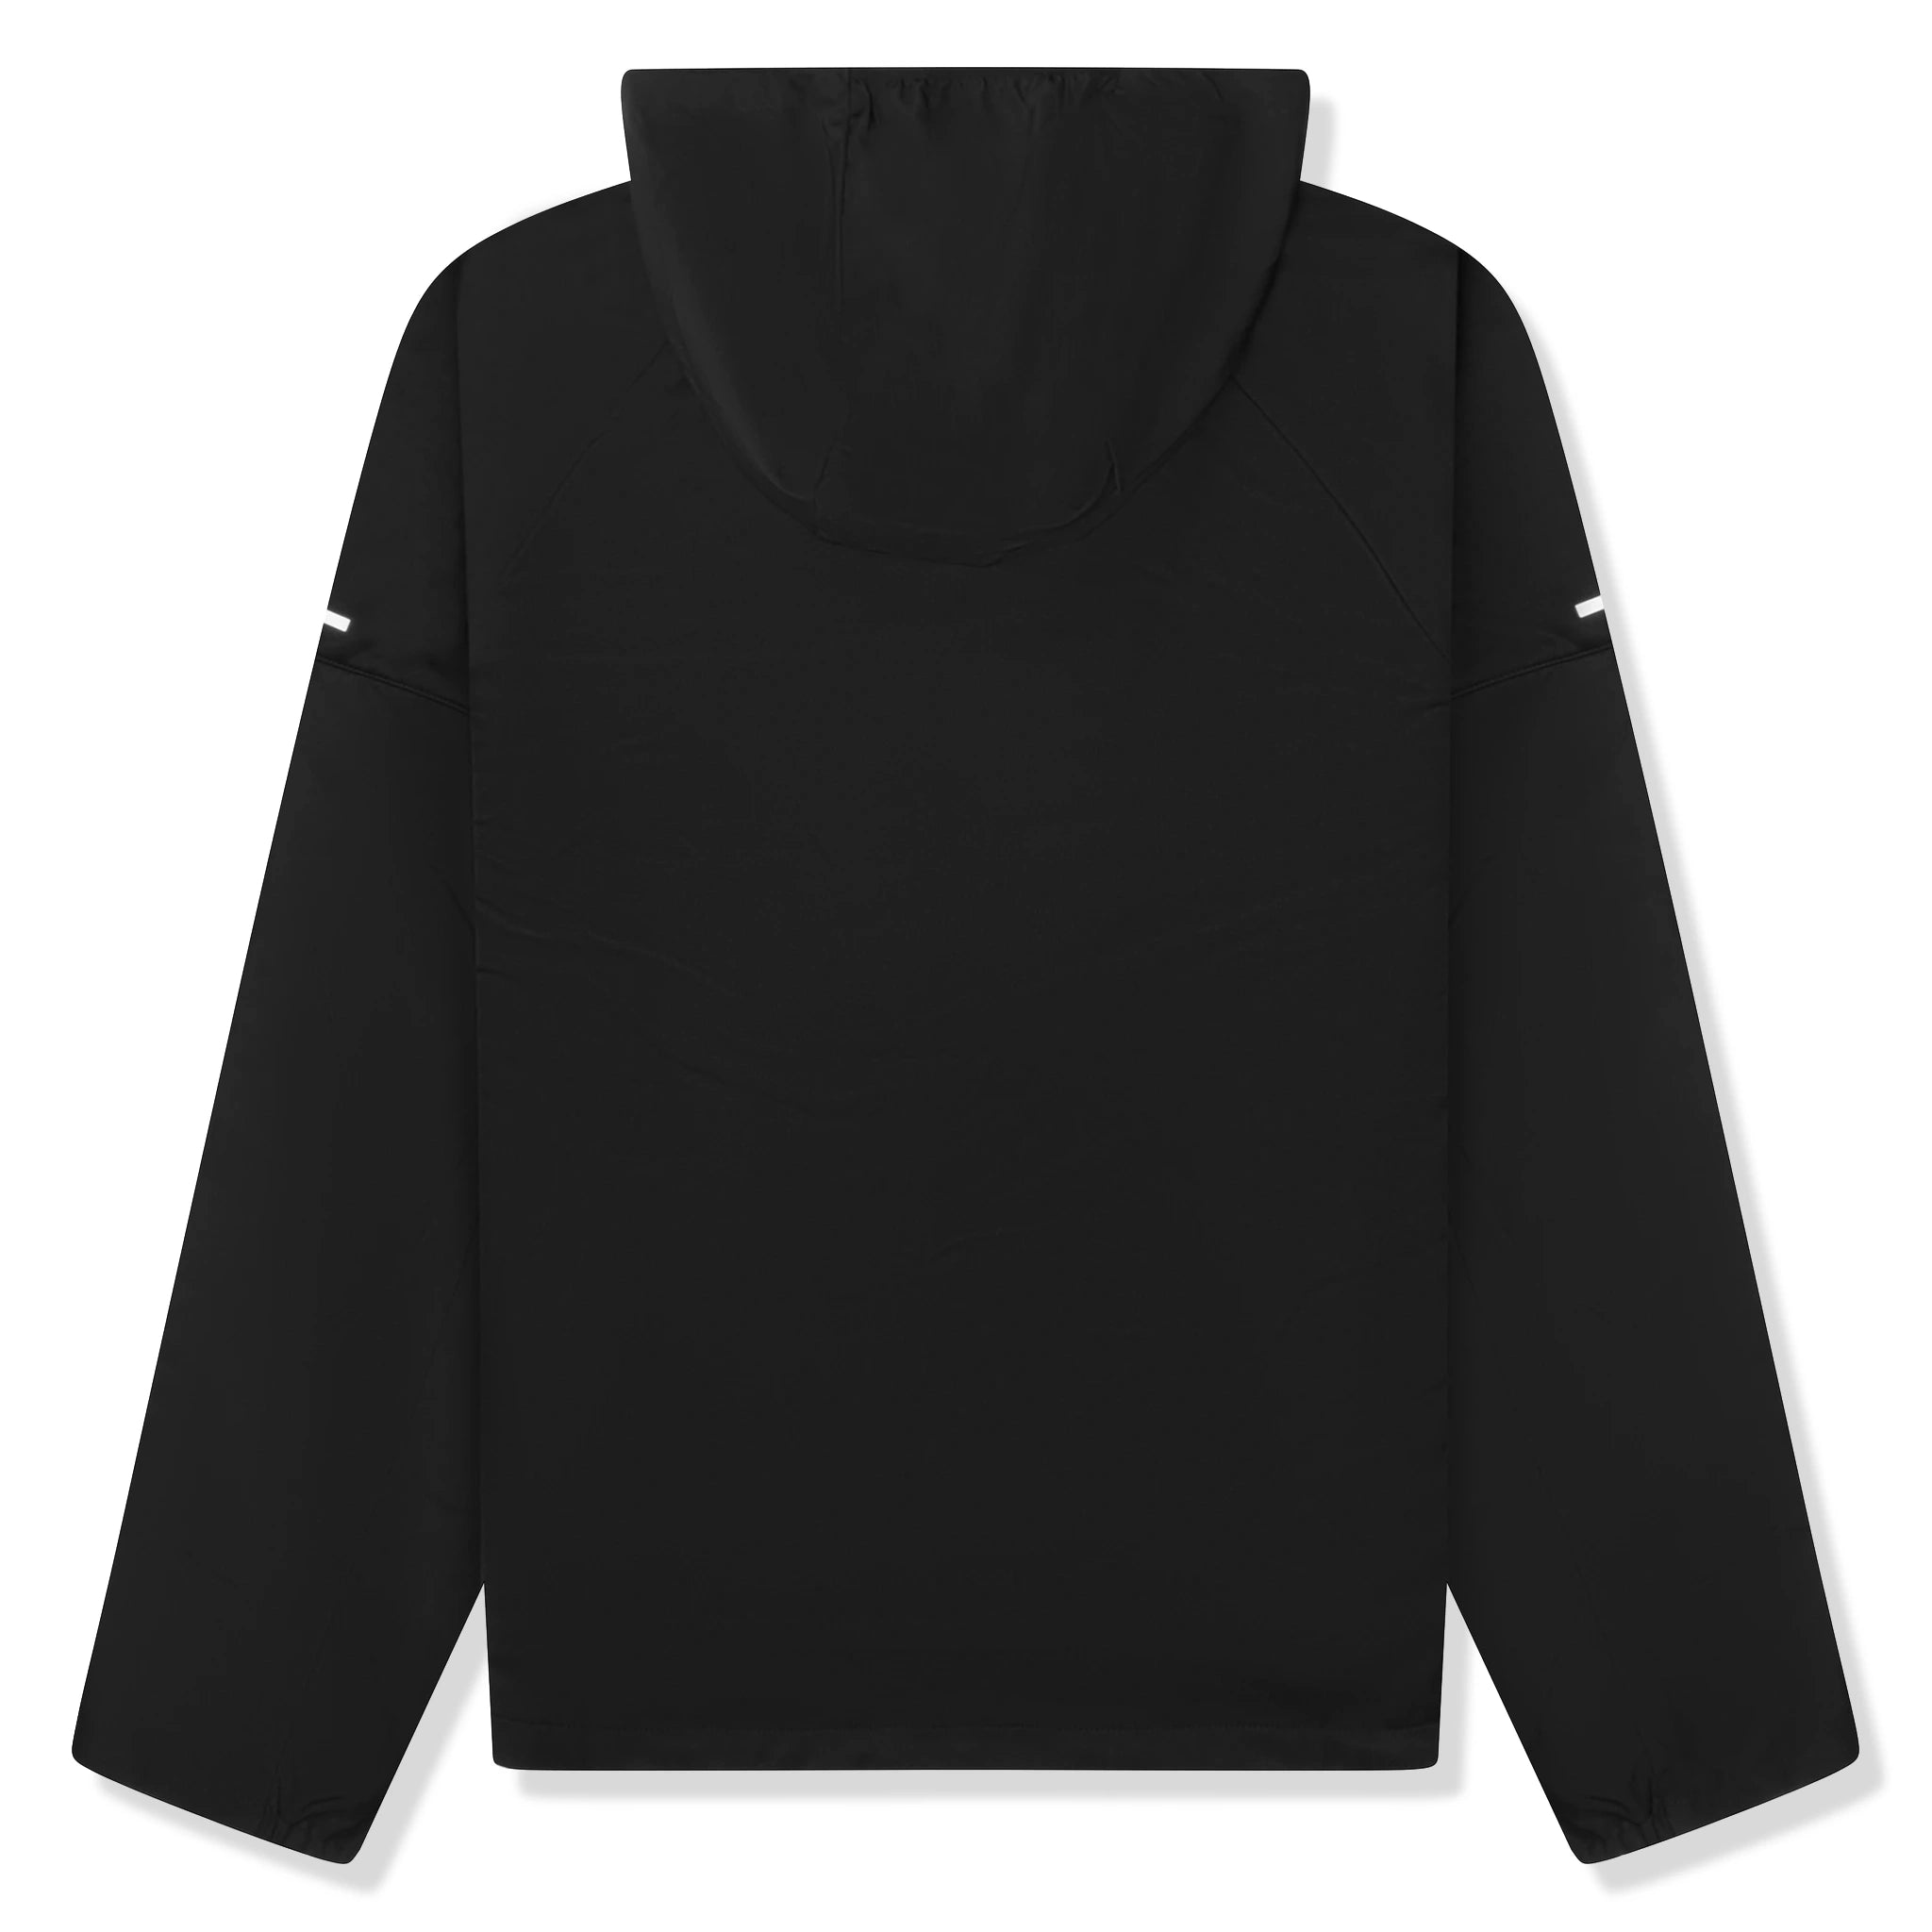 Back view of Nike Therma Black Jacket DH6682-010